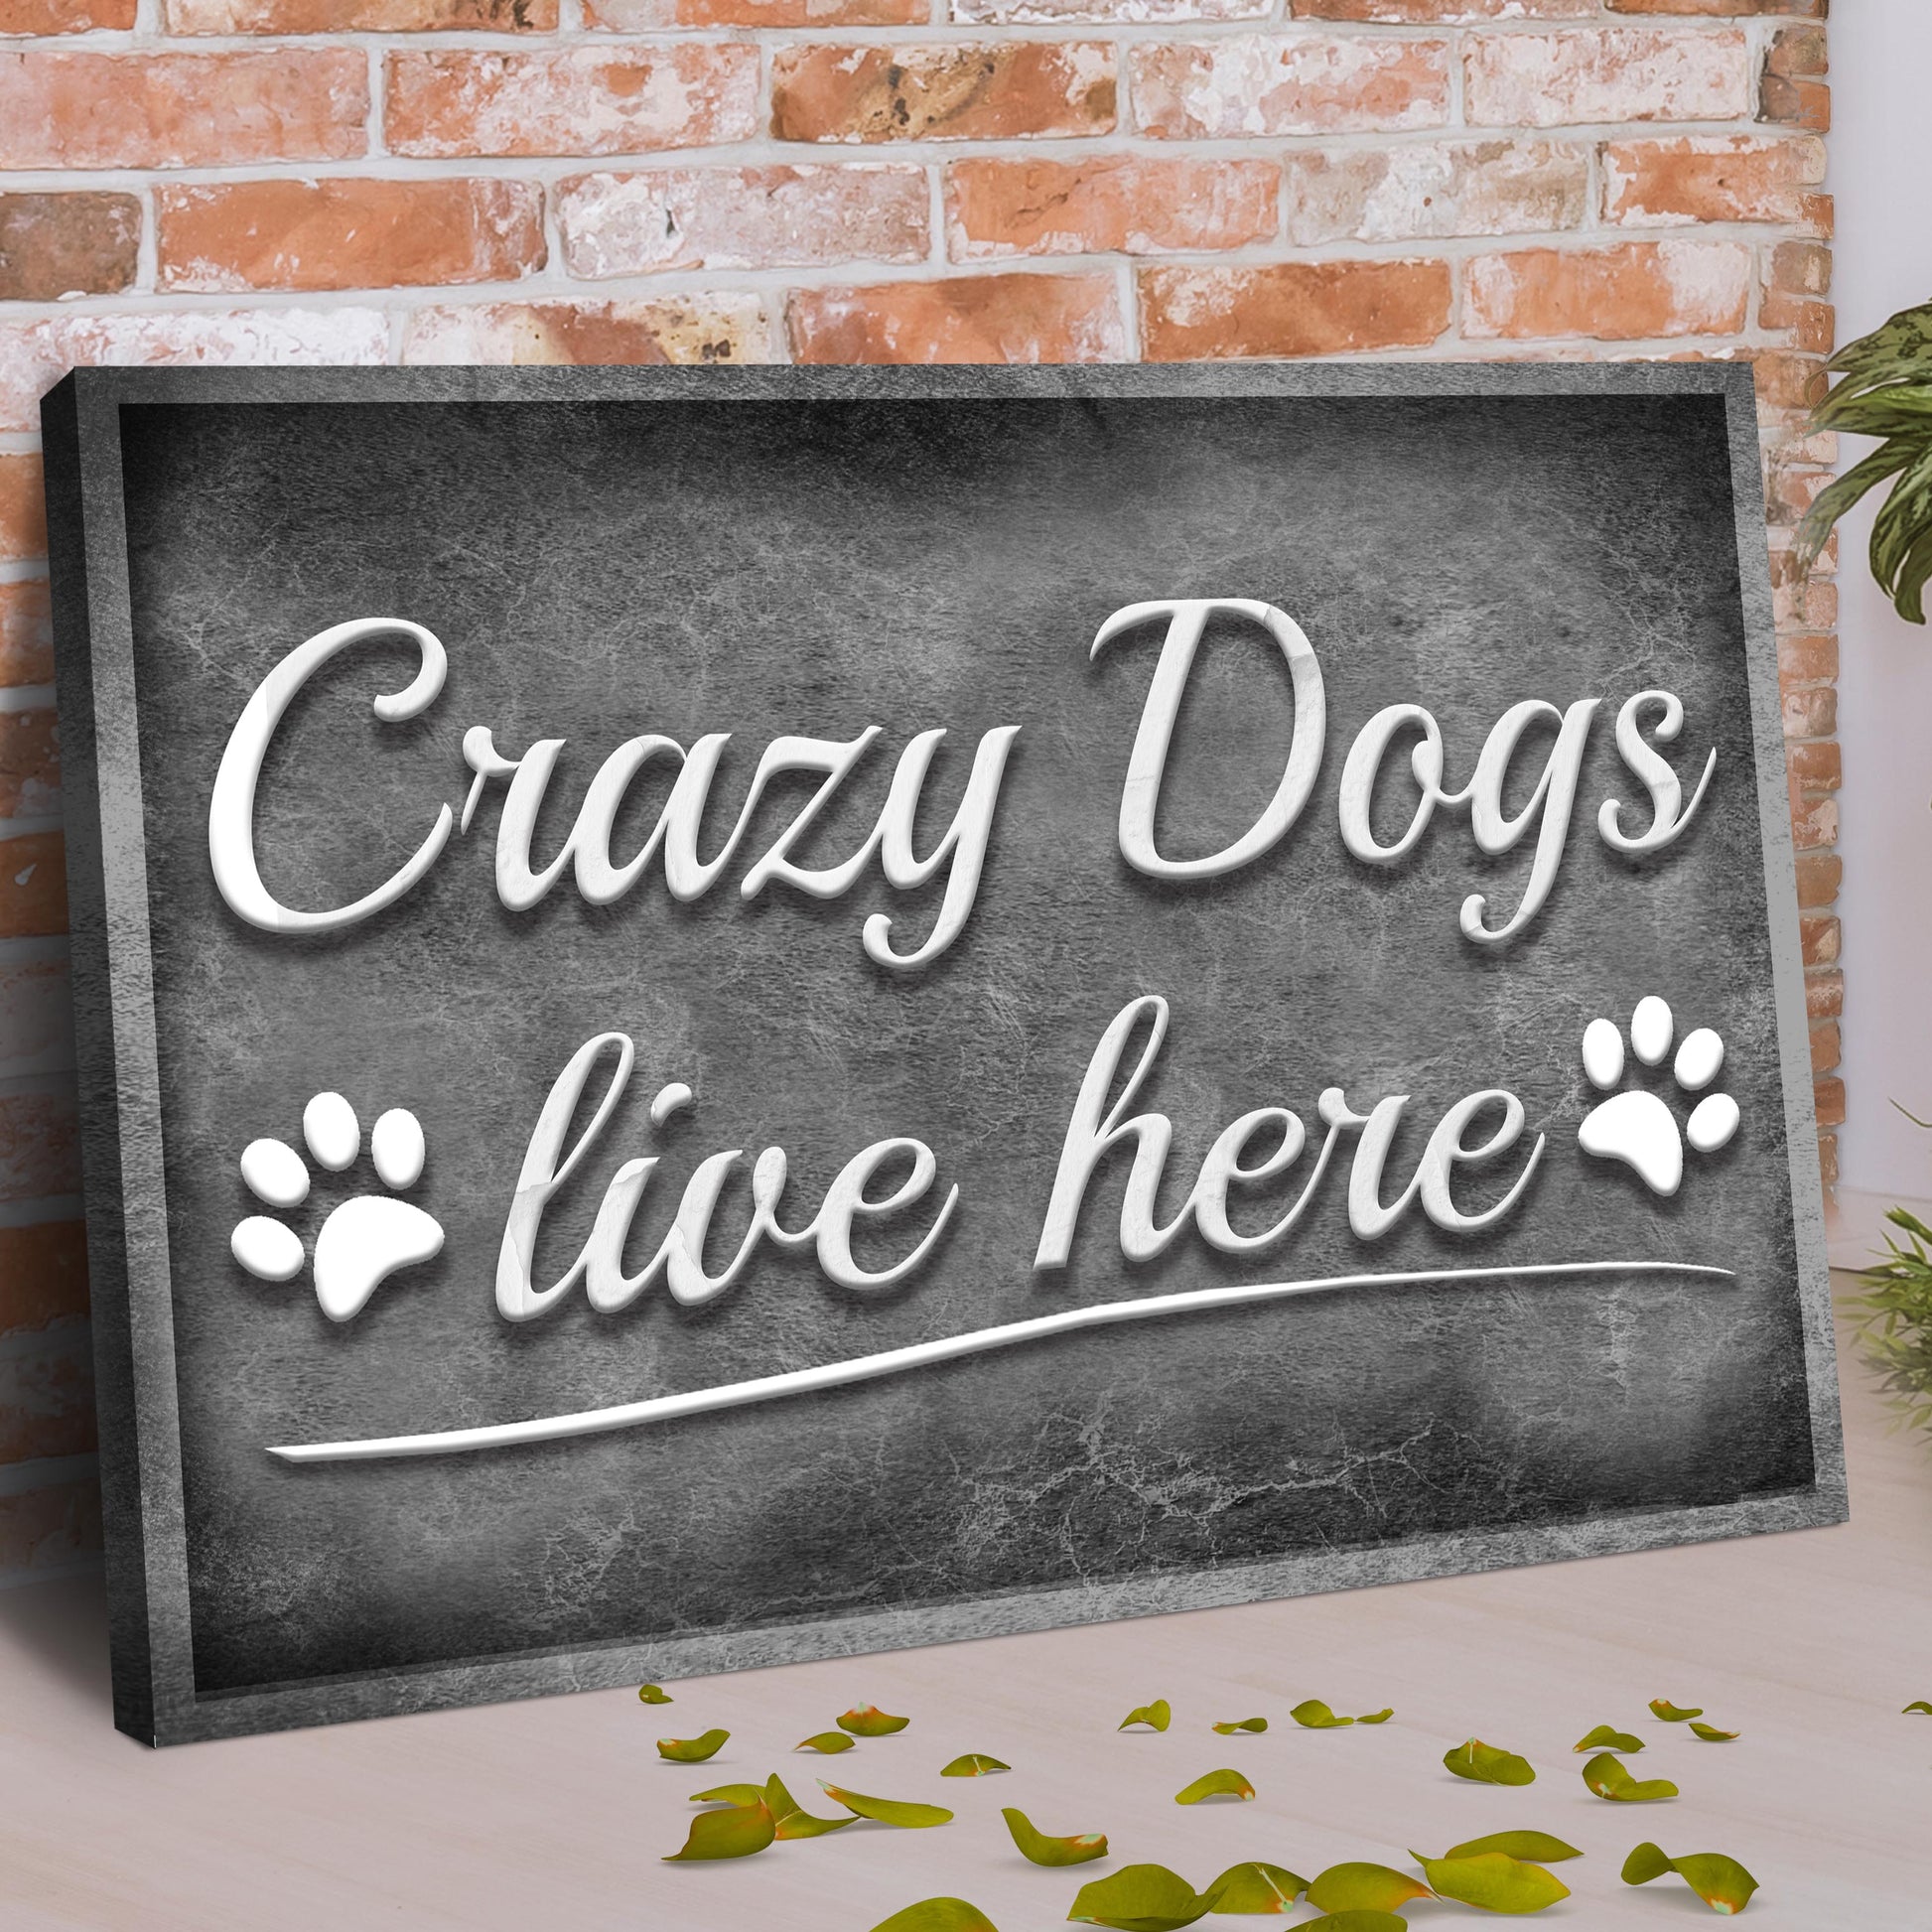 Crazy Dogs Live Here Sign II Style 2 - Image by Tailored Canvases